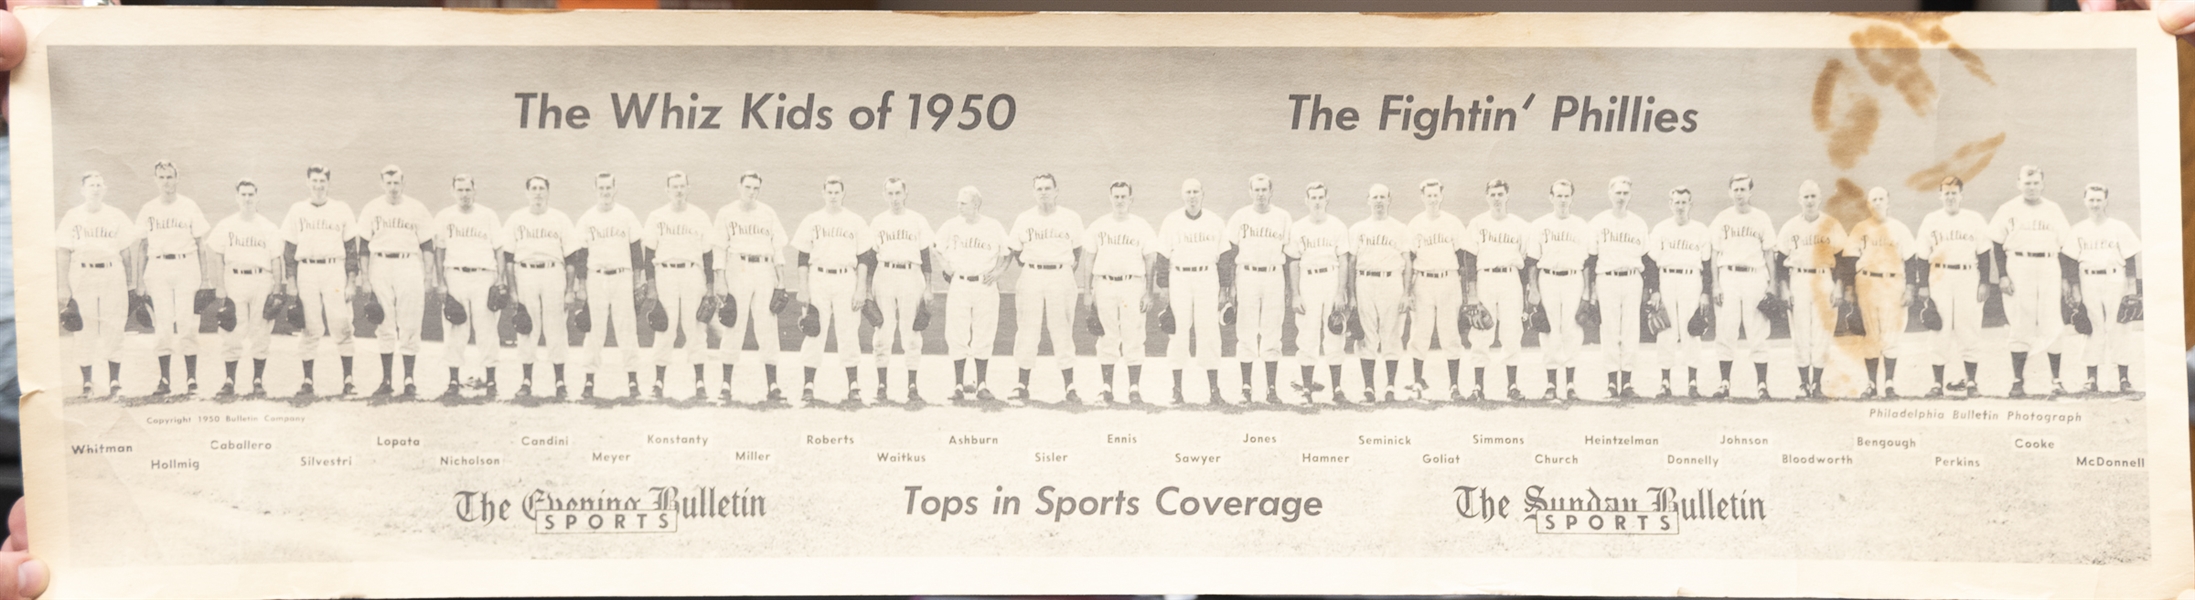  1950 The Whiz Kids Phillies 36x10 Team Print from The Sunday Bulletin